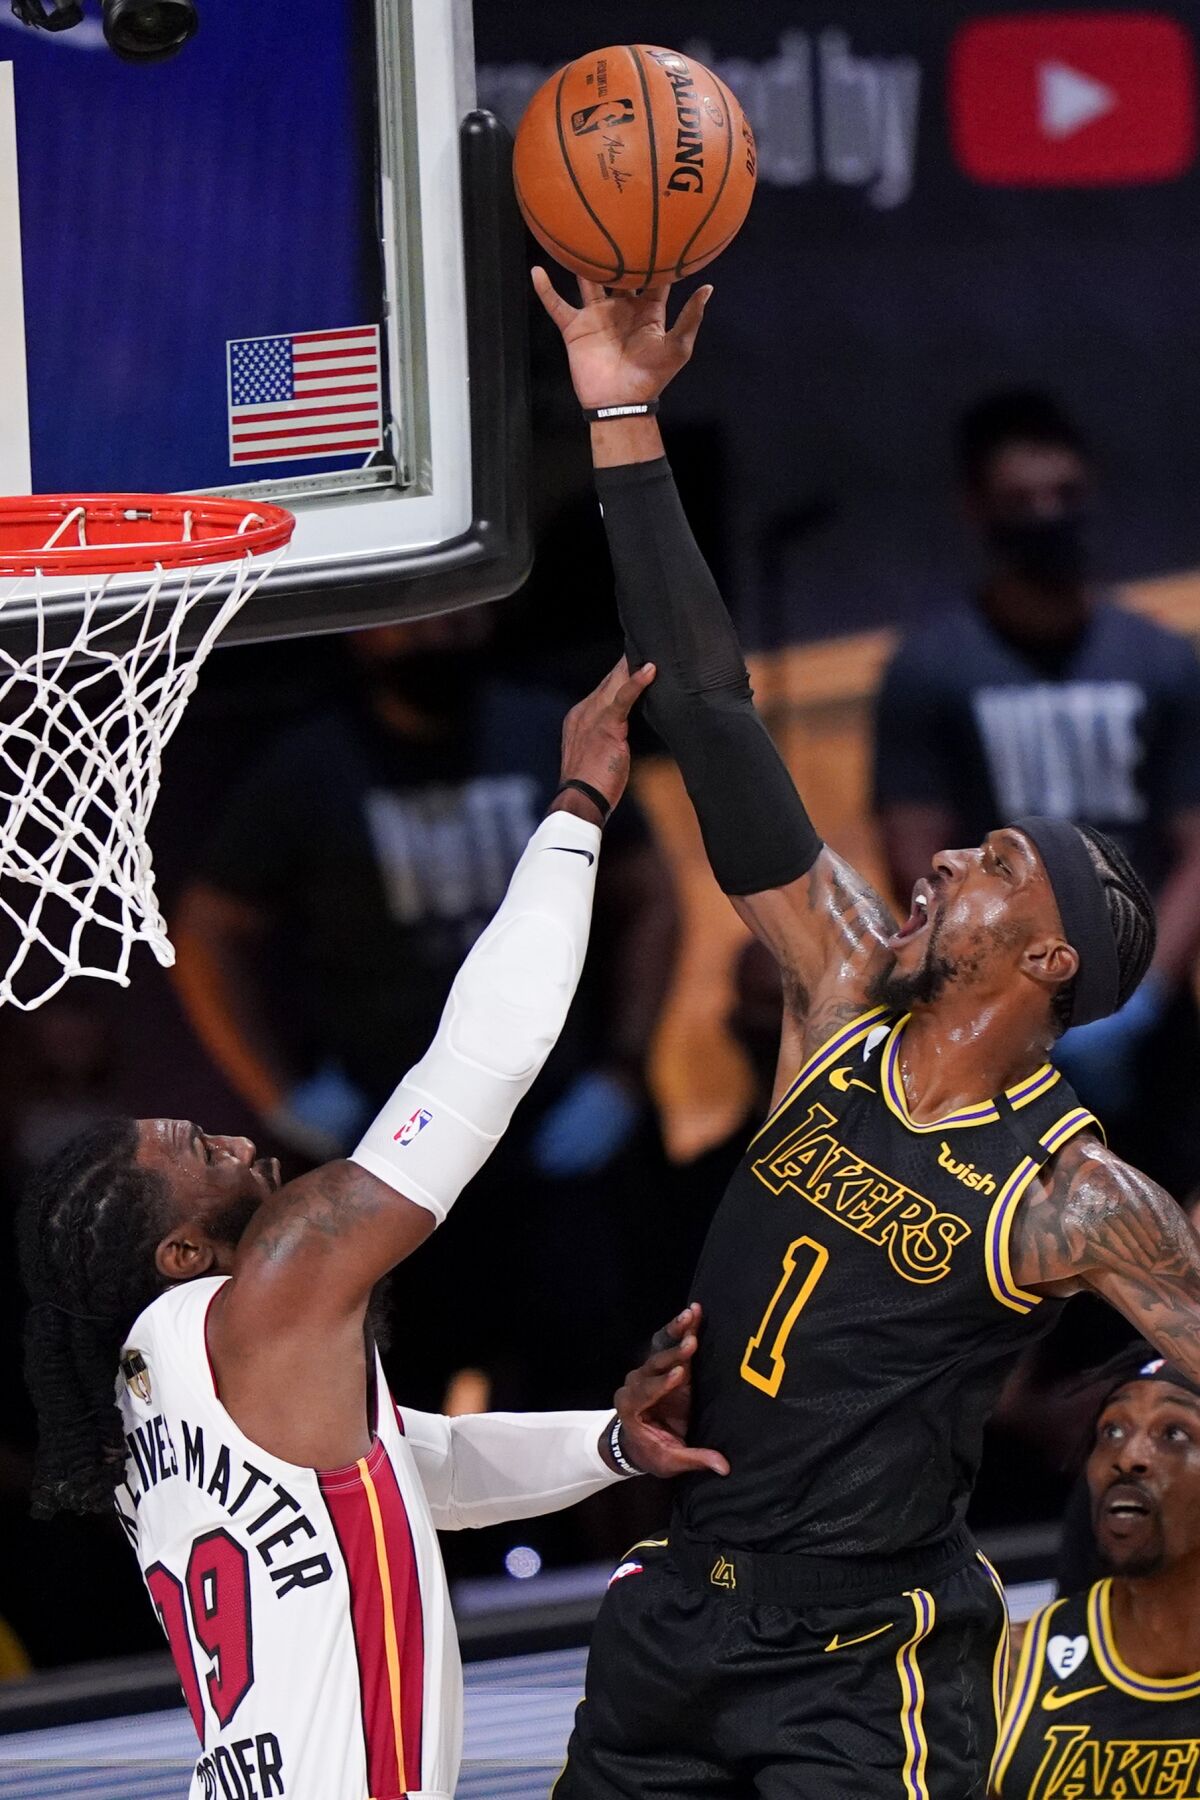 Lakers guard Kentavious Caldwell-Pope scores on a layup and draws a foul against Heat forward Jae Crowder during Game 5.